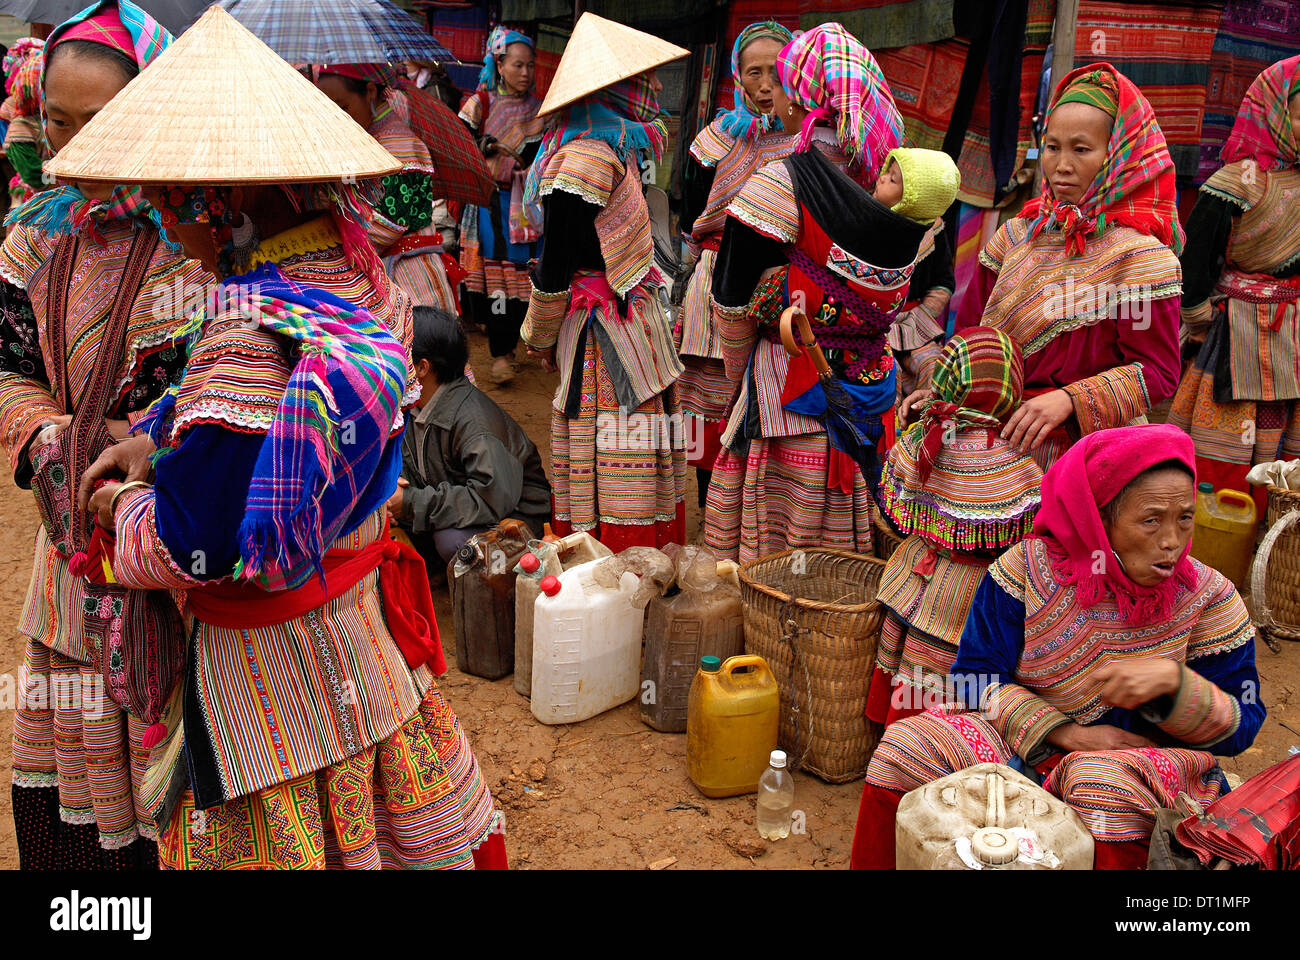 Flower Hmong ethnic group at Can Cau market, Bac Ha area, Vietnam, Indochina, Southeast Asia, Asia Stock Photo